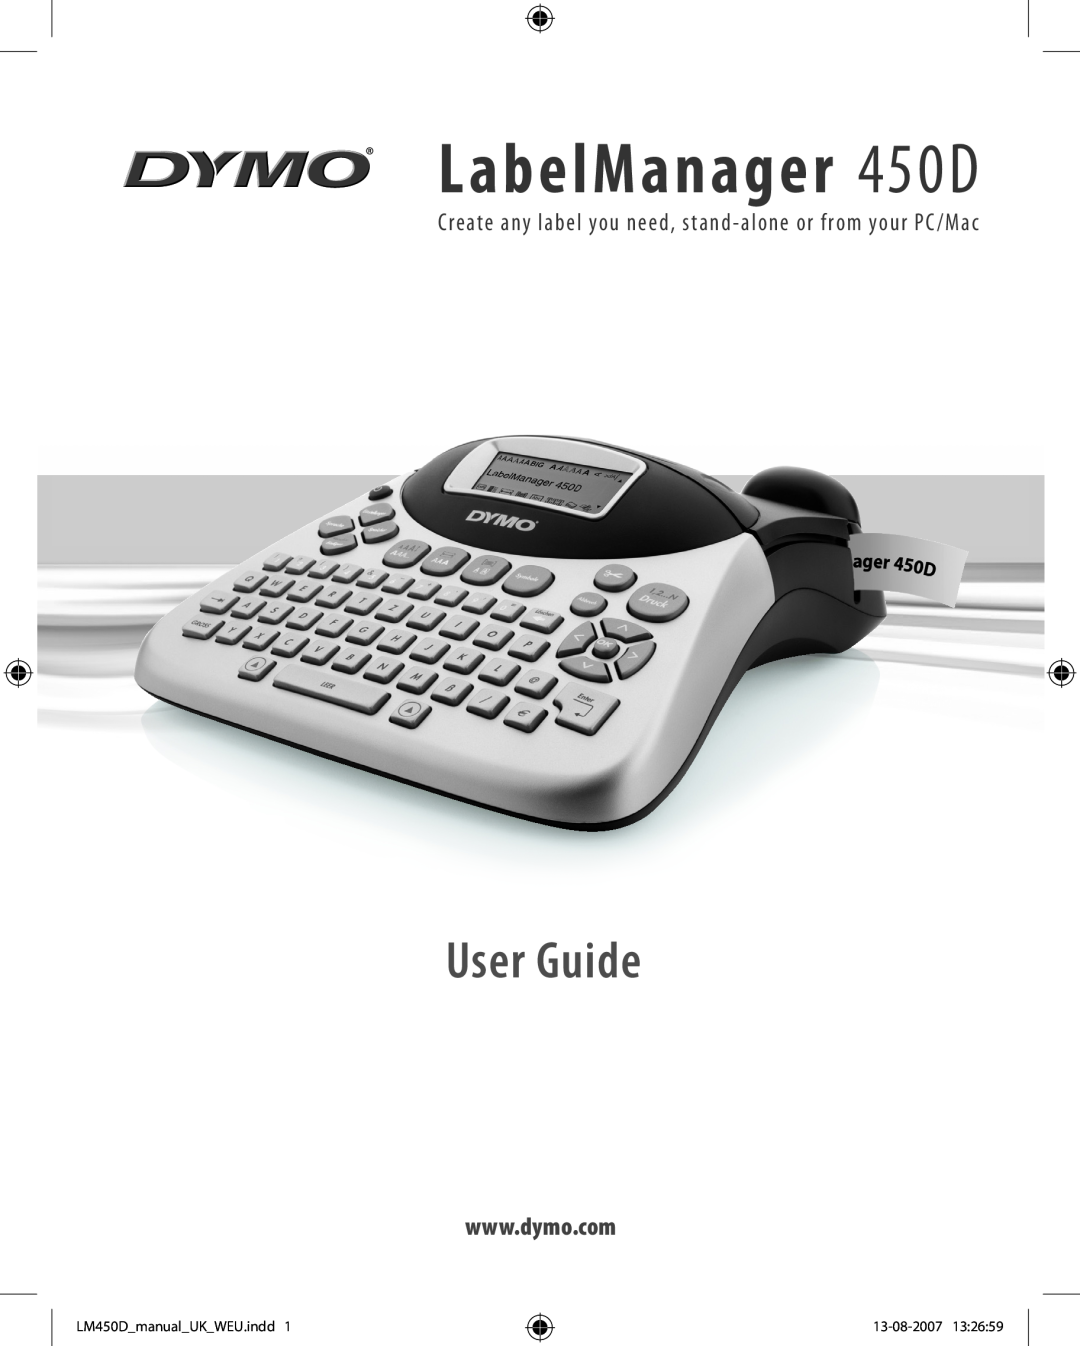 Dymo manual LabelManager 450D, User Guide, Cre ate any label you need, s tand - alone or f rom your PC /Mac, 13-08-2007 